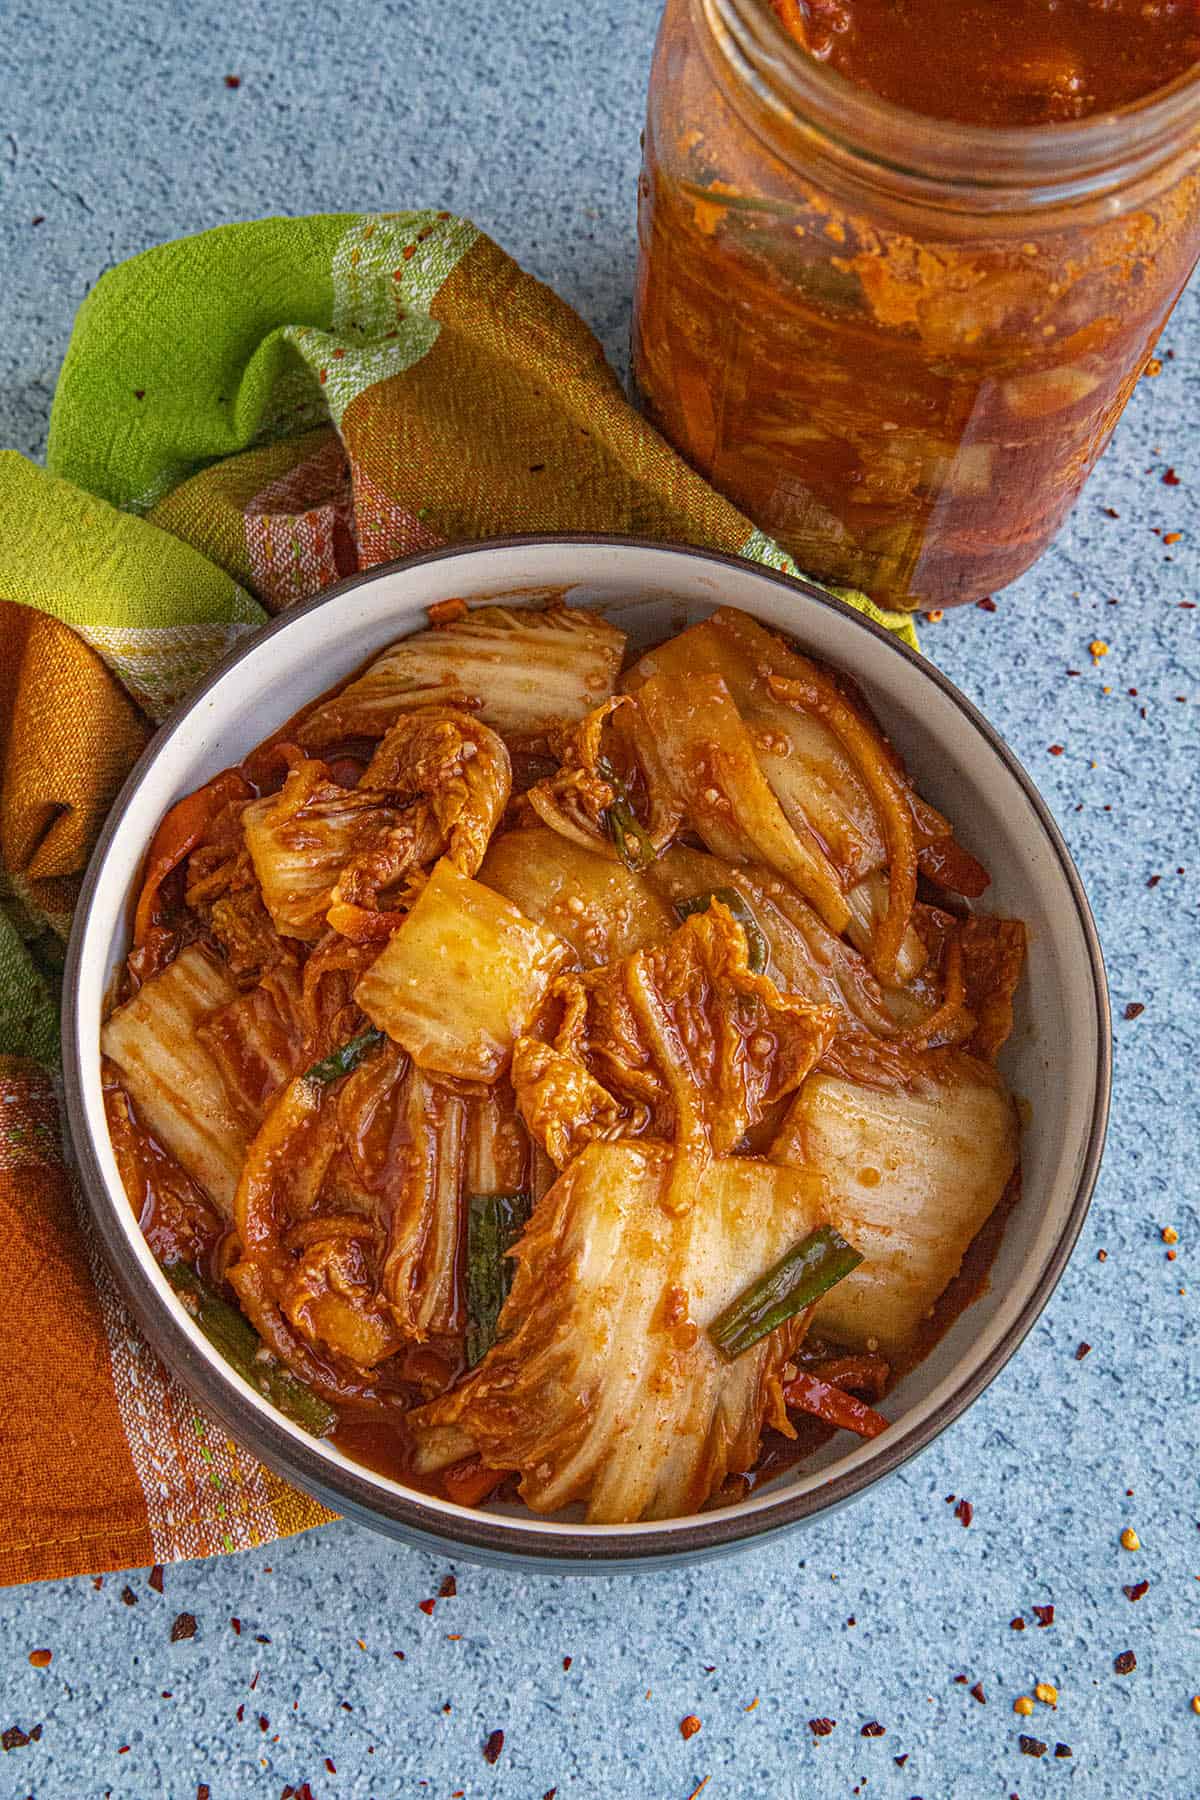 Spicy Kimchi in a bowl, ready to serve